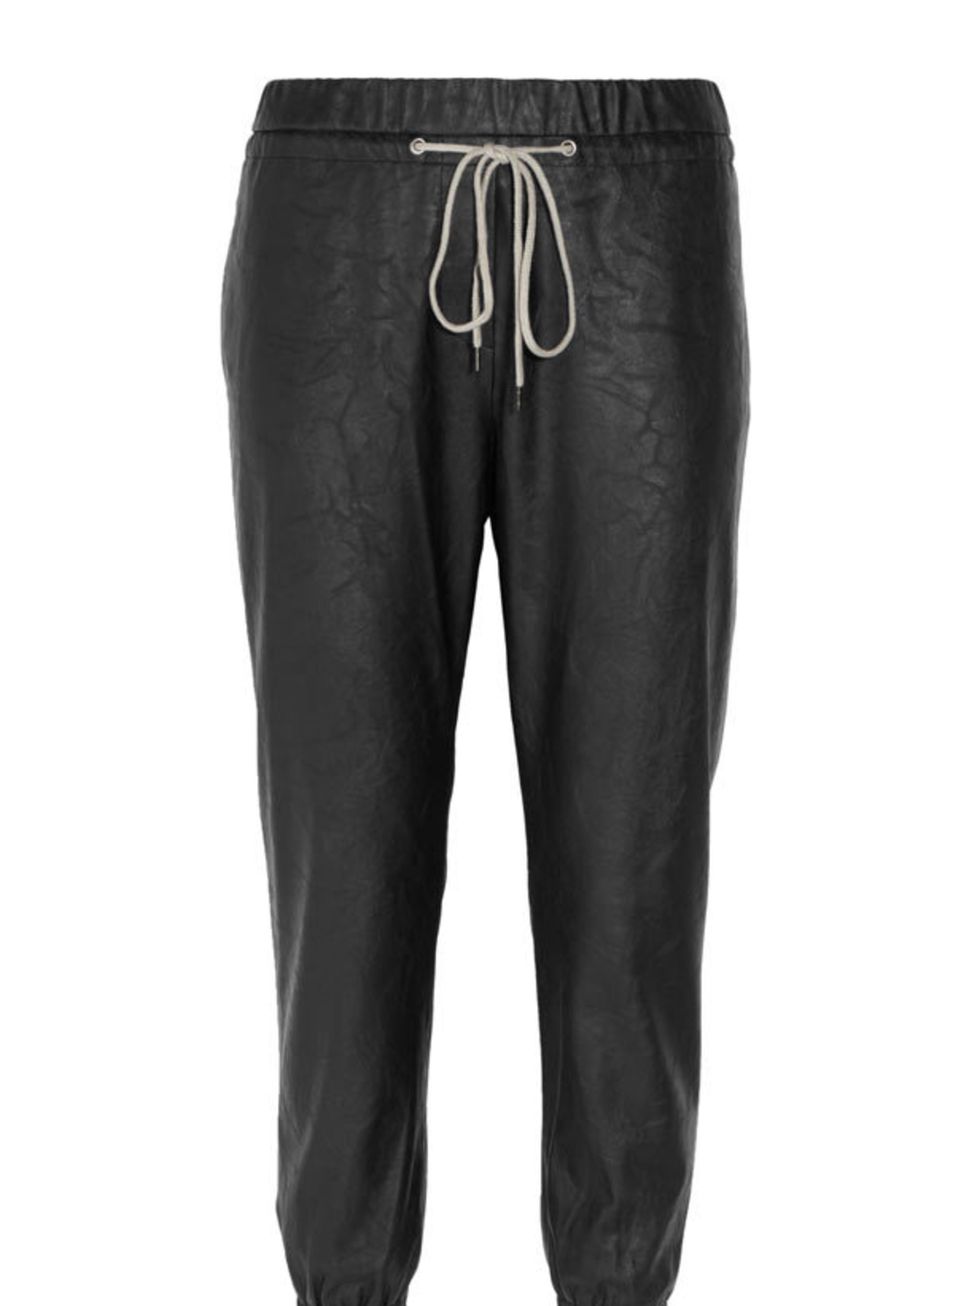 <p>L'Agence faux leather track pants, £265, at <a href="http://www.net-a-porter.com/product/167004">Net-a-Porter</a></p>